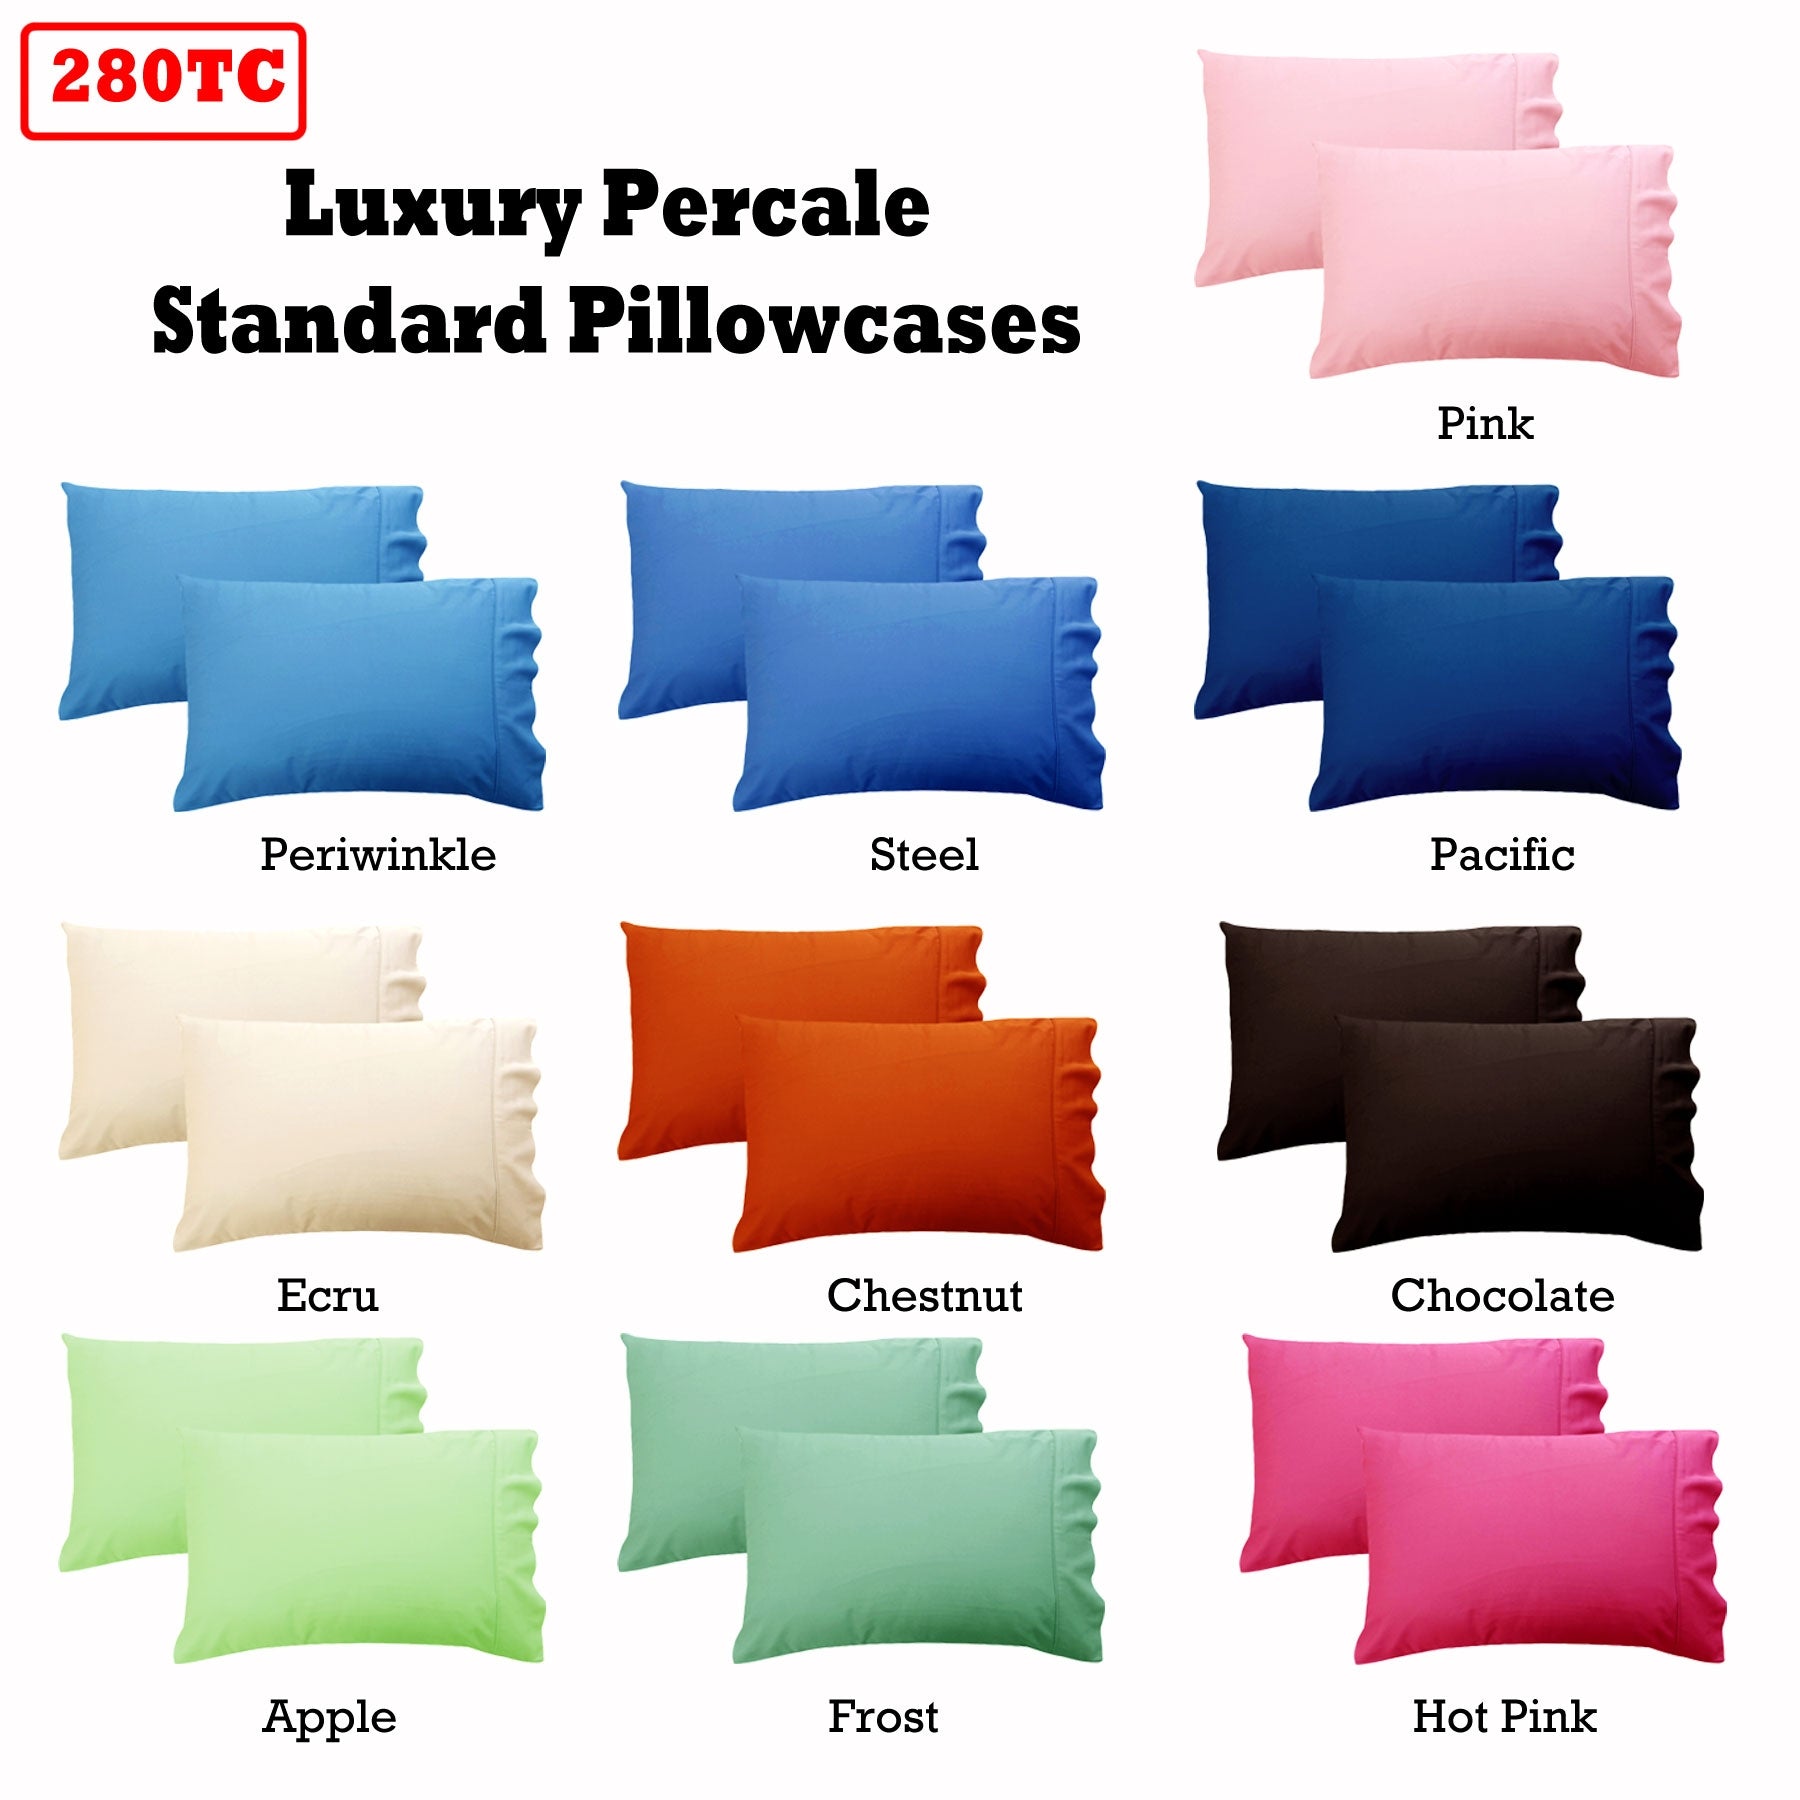 280TC Luxury Percale Standard Pillowcases Pacific